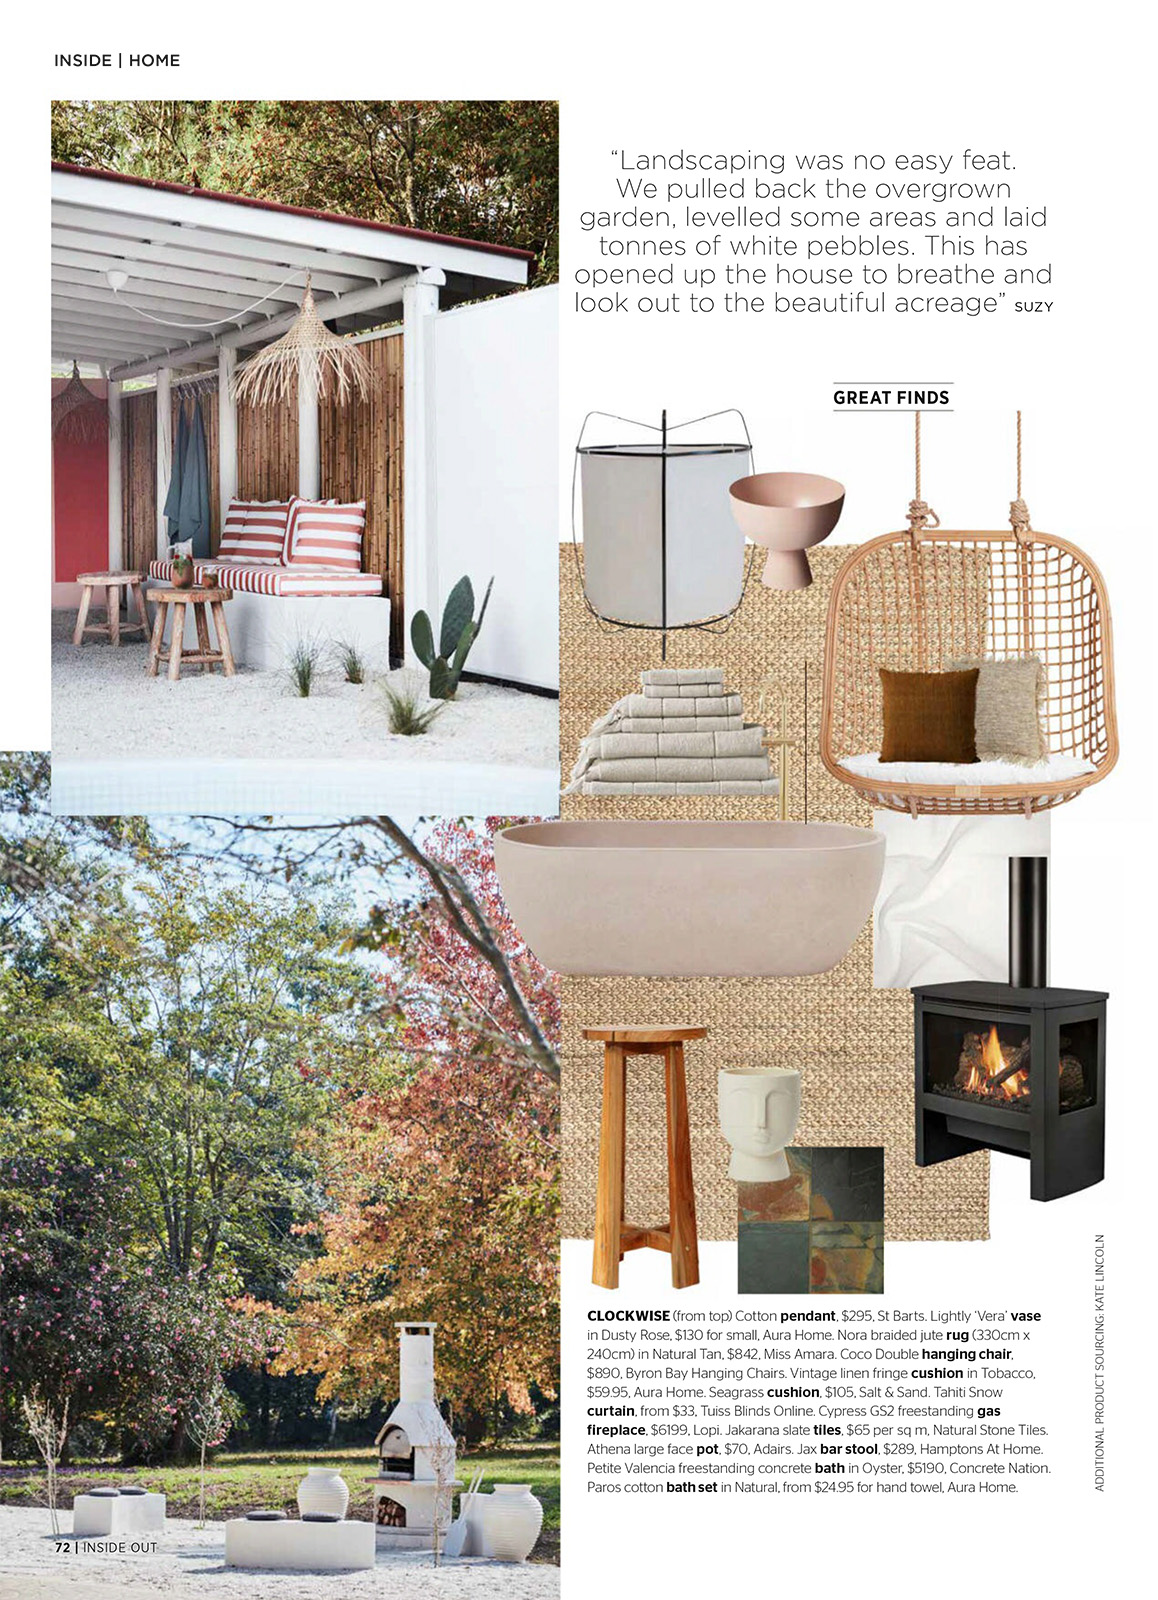 The Casa – Inside Out magazine